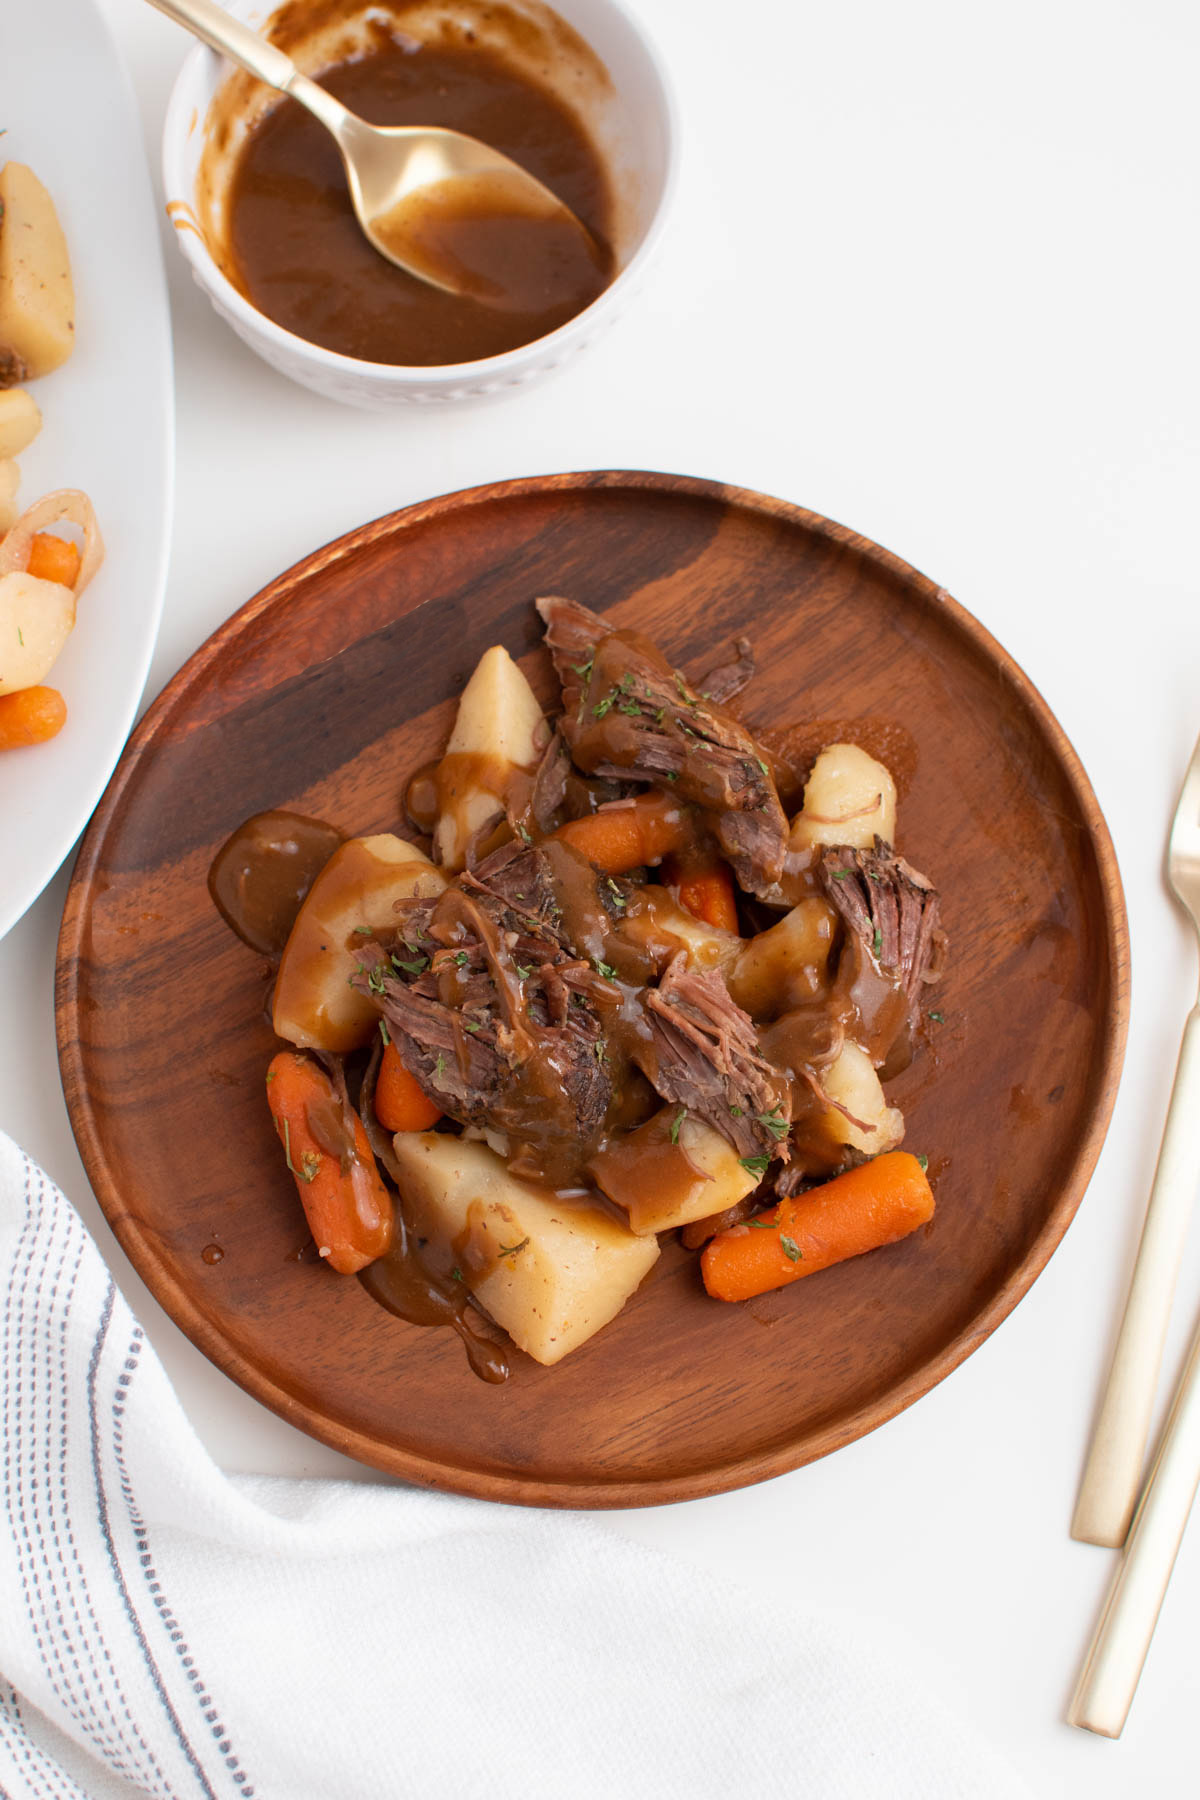 Pieces of pot roast, carrots, potatoes, and gravy on wood plate, which is on white table.